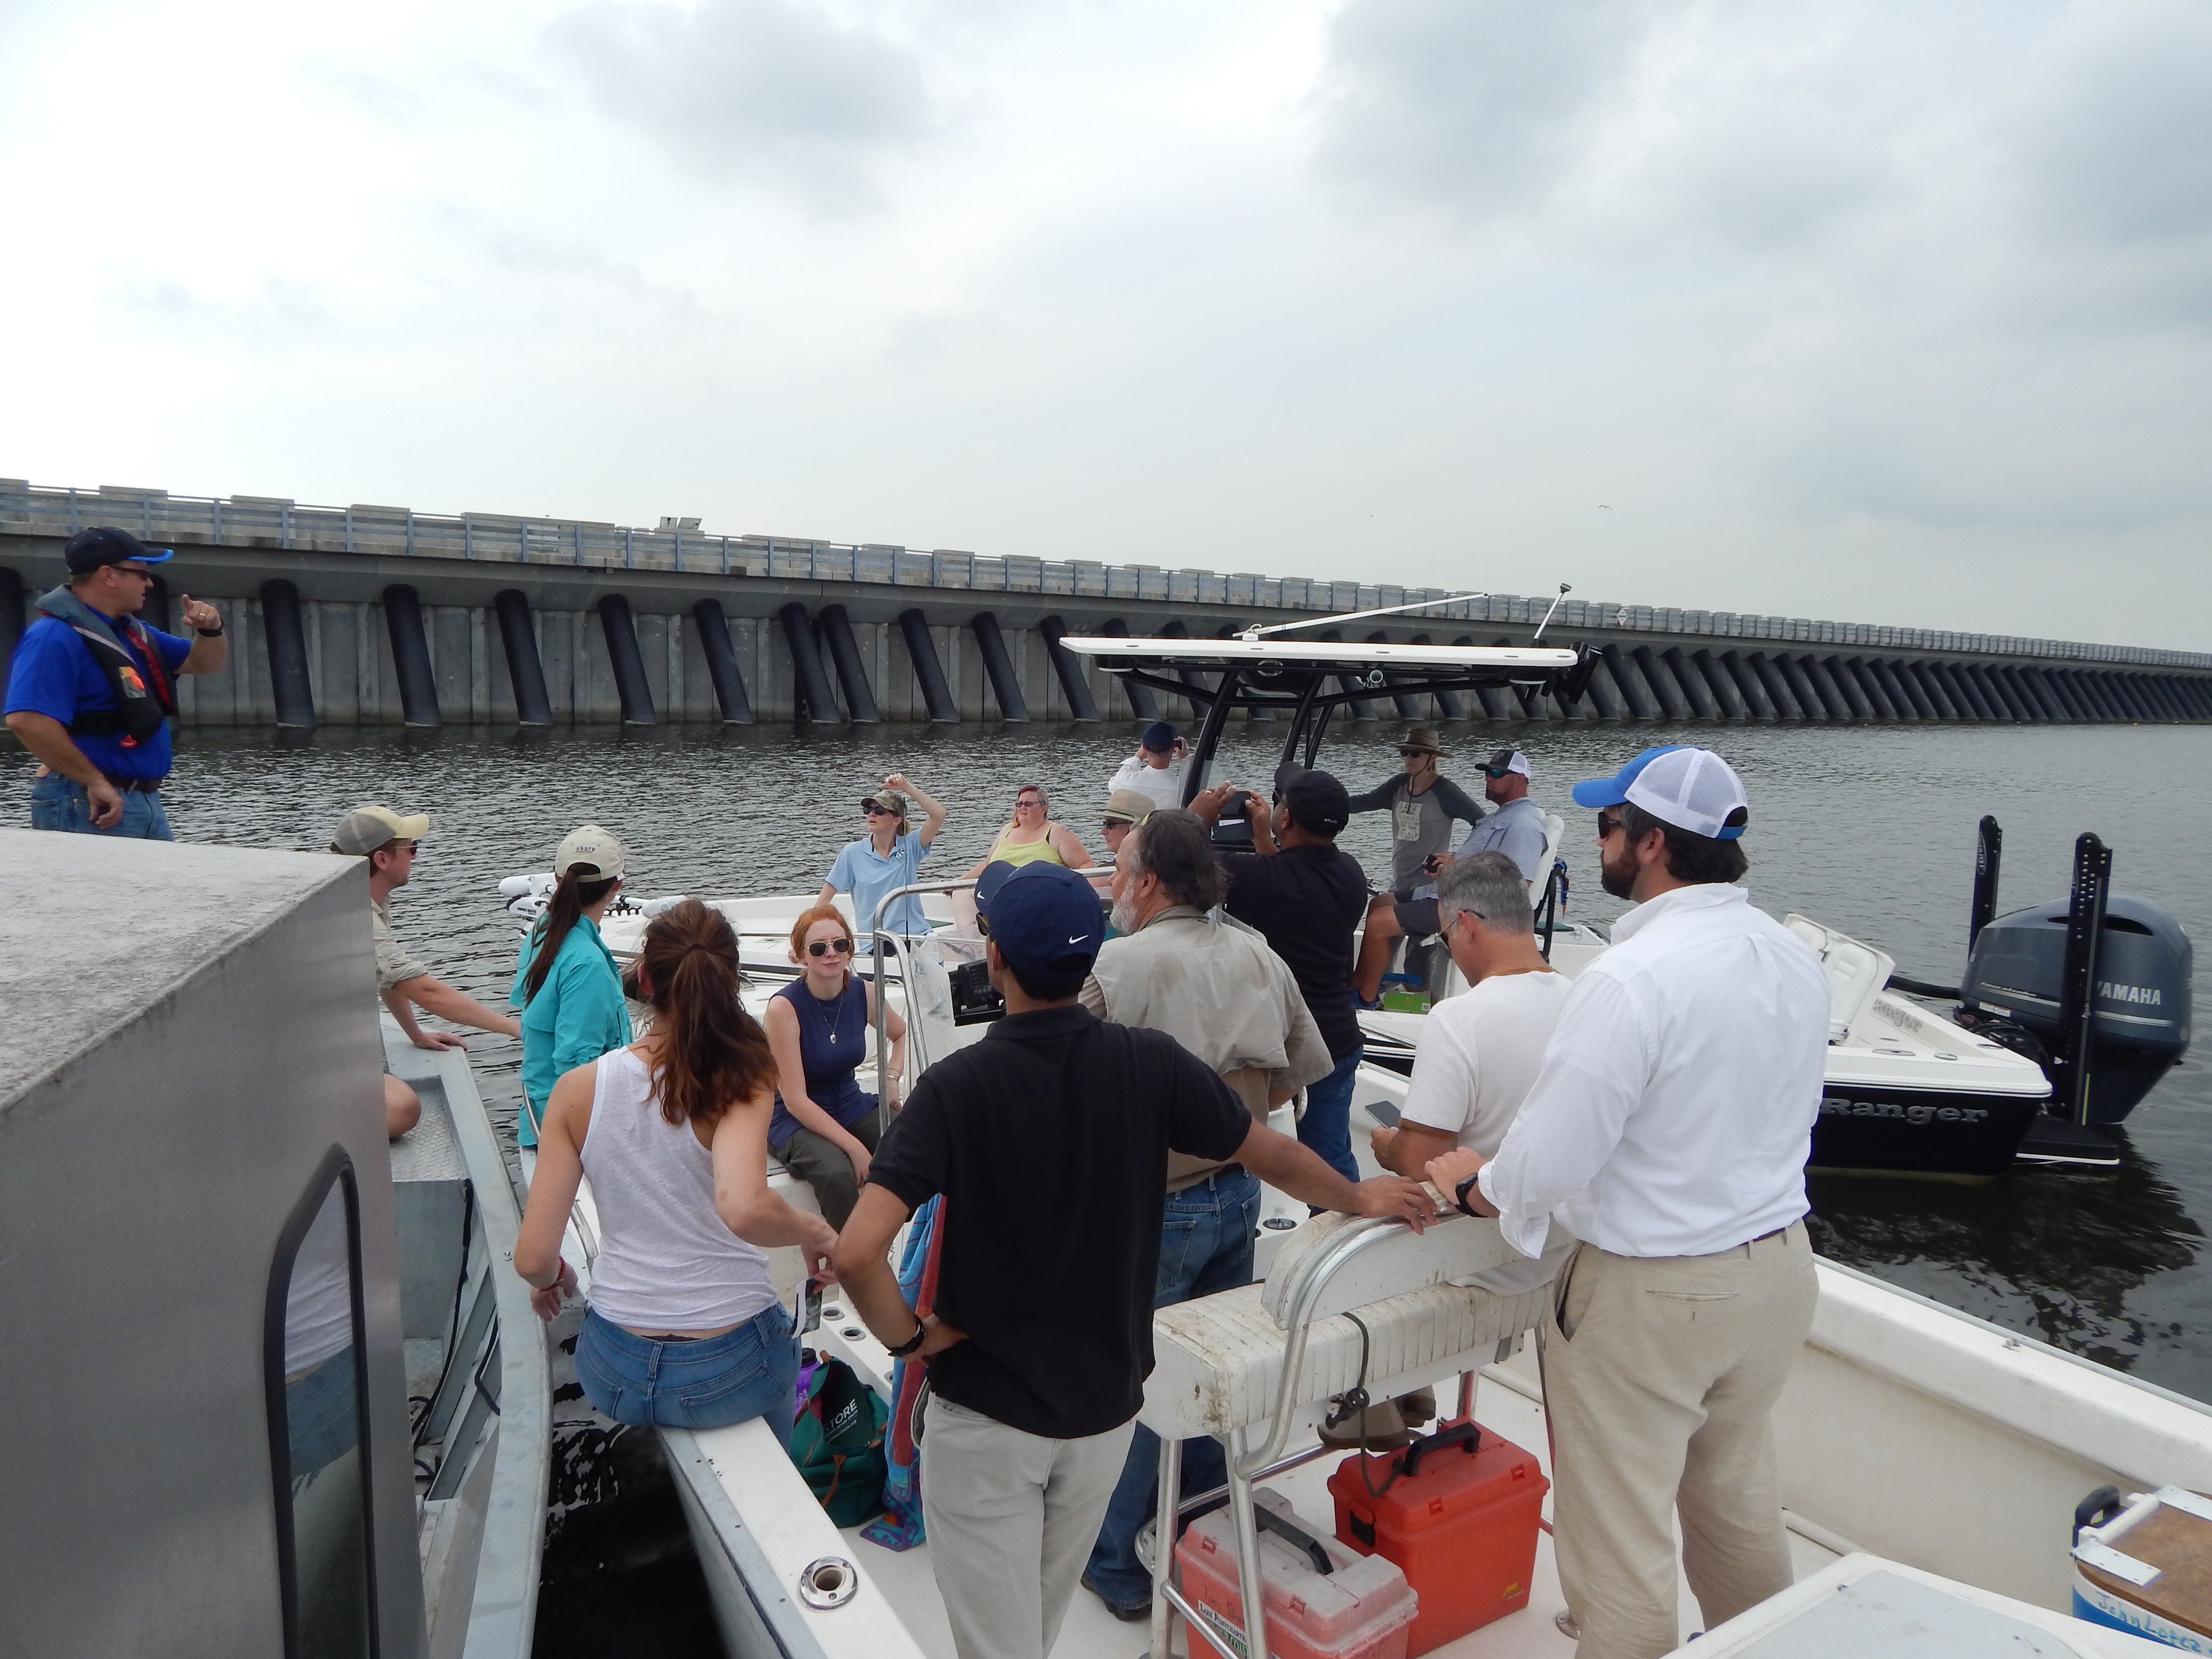 The group discusses the surge barrier and adjacent wetland restoration efforts